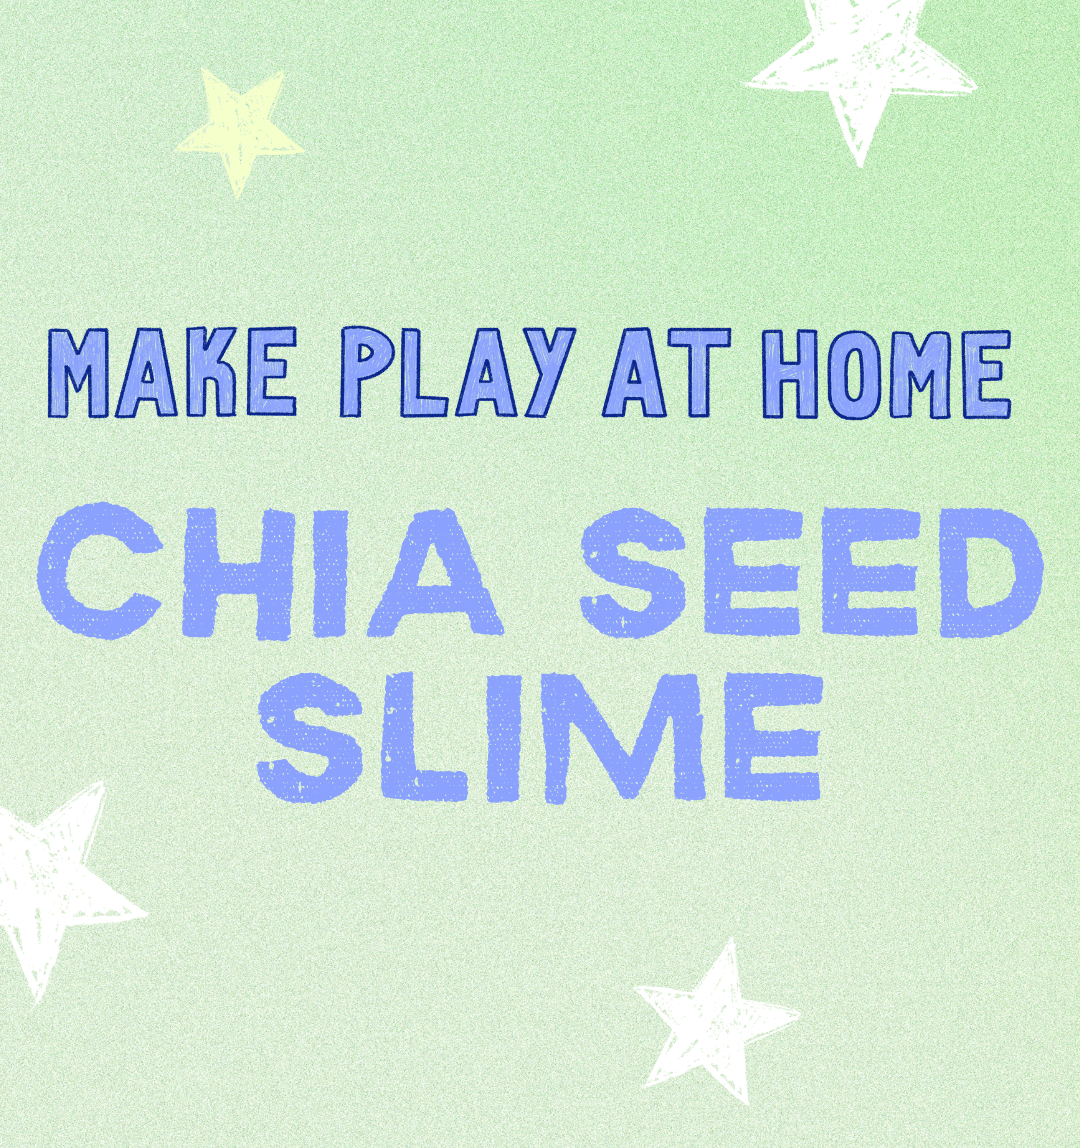 A green graphic with yellow and white hand drawn stars. Words in blue read: Make Play at Home, Chia Seed Slime